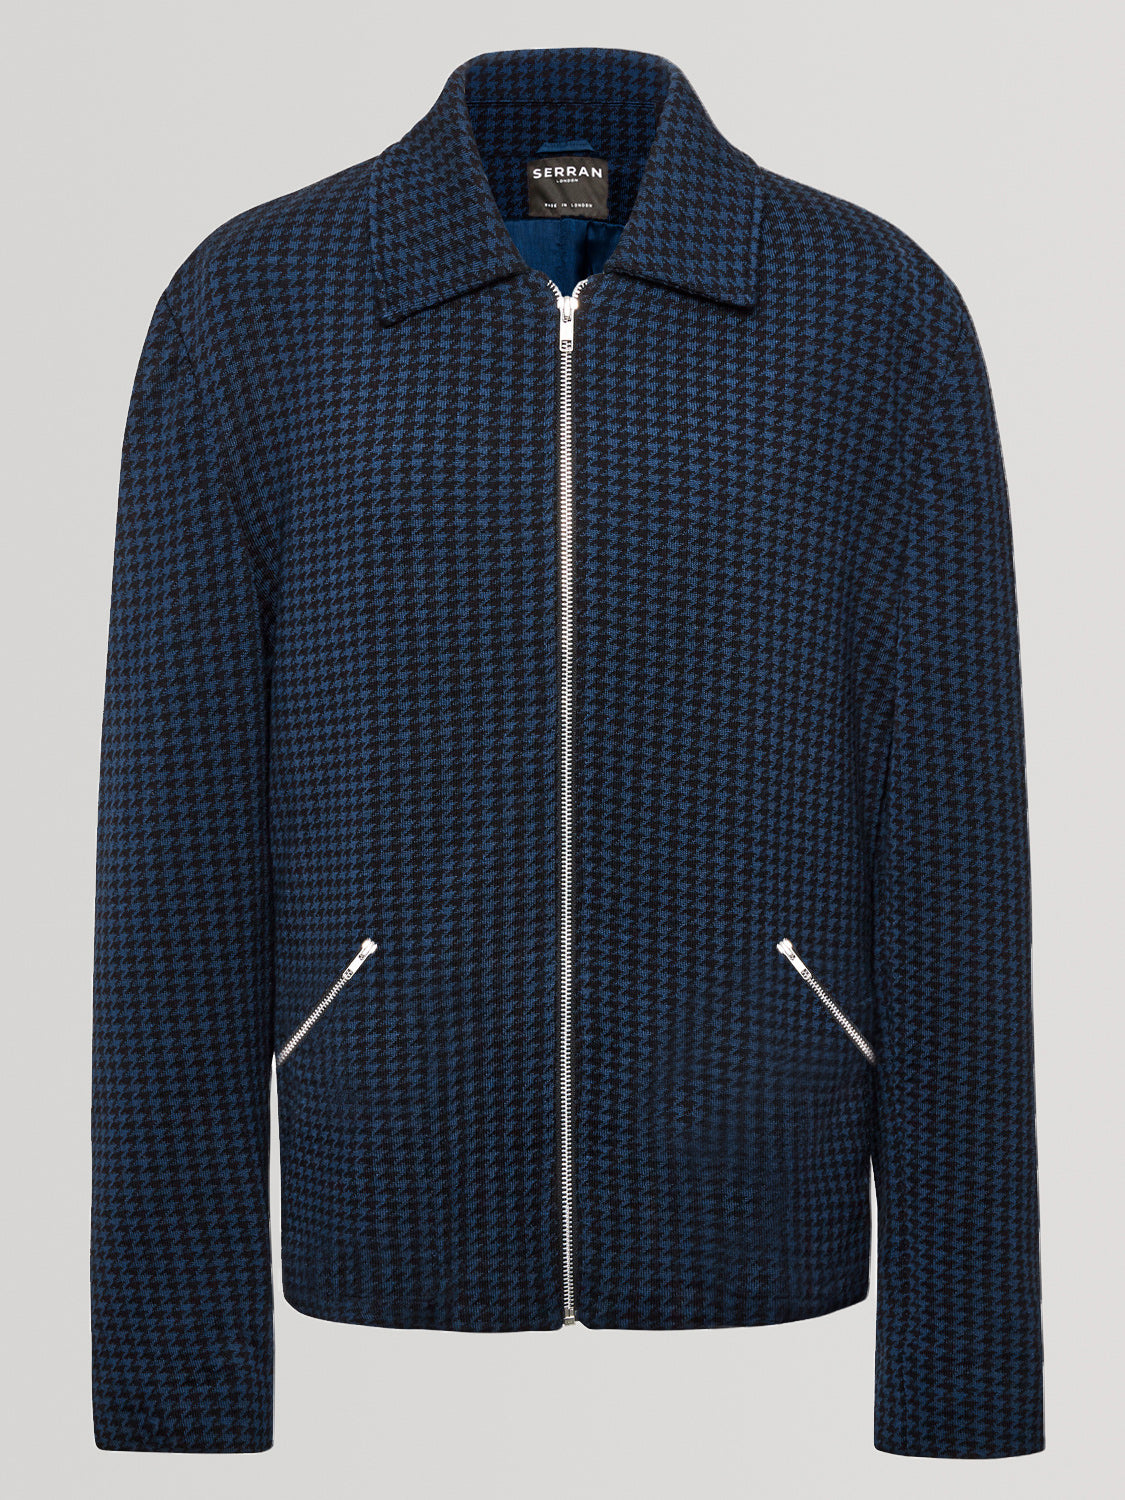 Houndstooth Knitted Jacket - Navy & Black